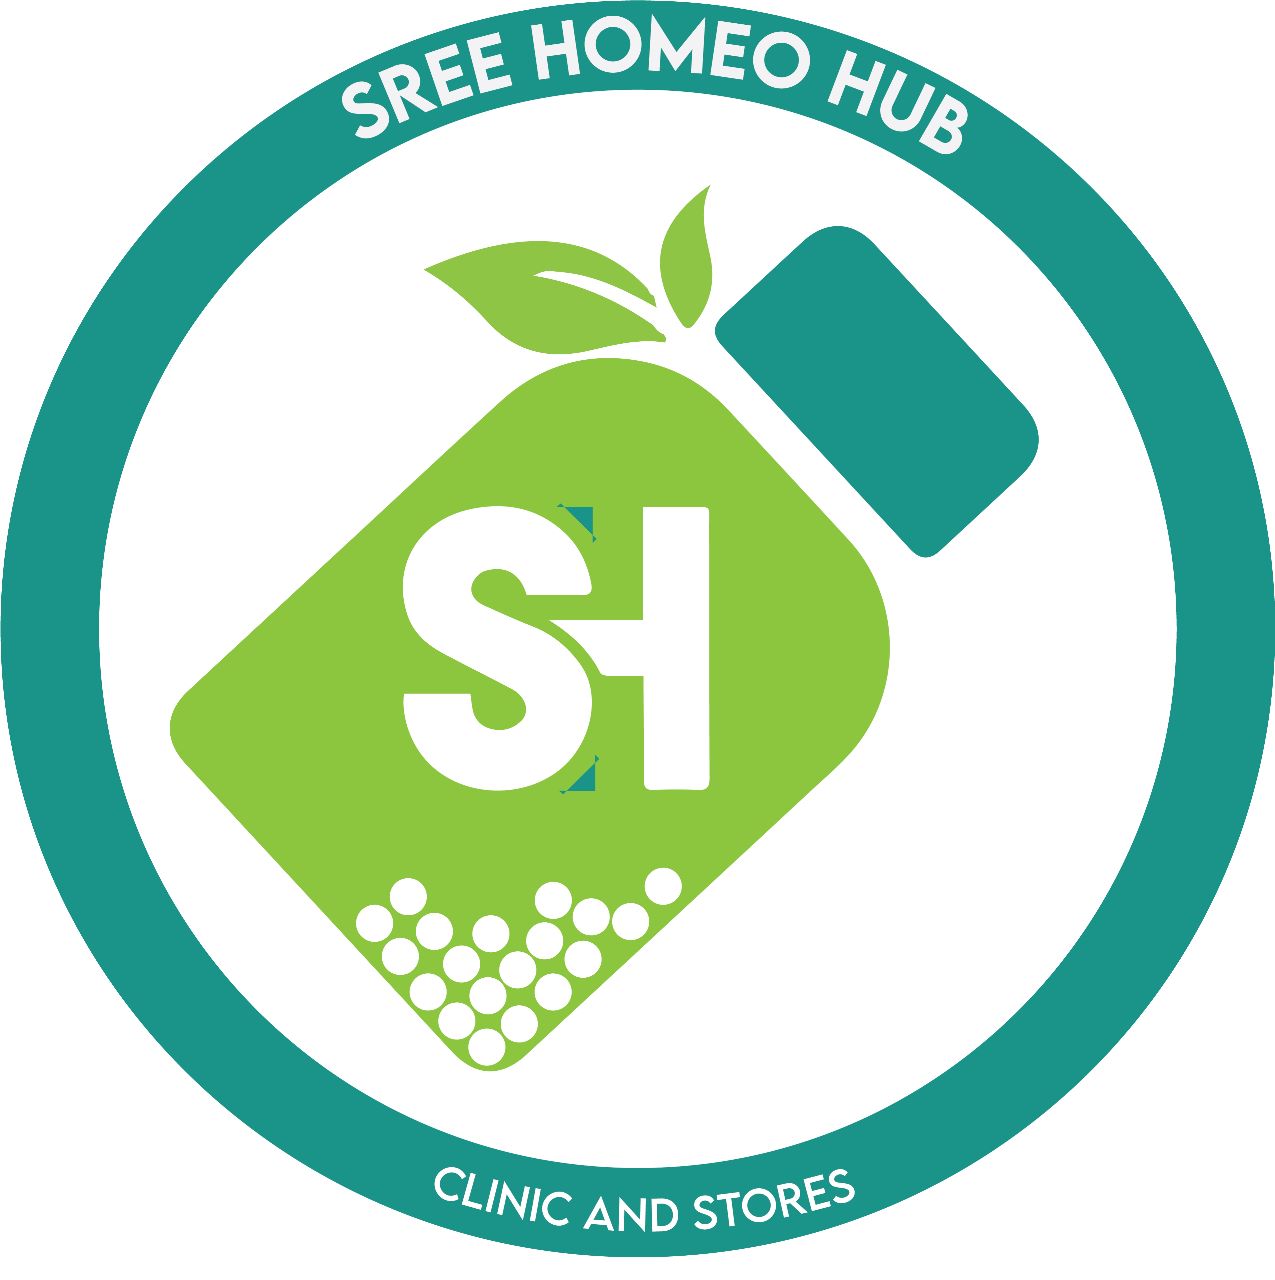 SREE HOMEO HUB CLINIC AND STORES - 91